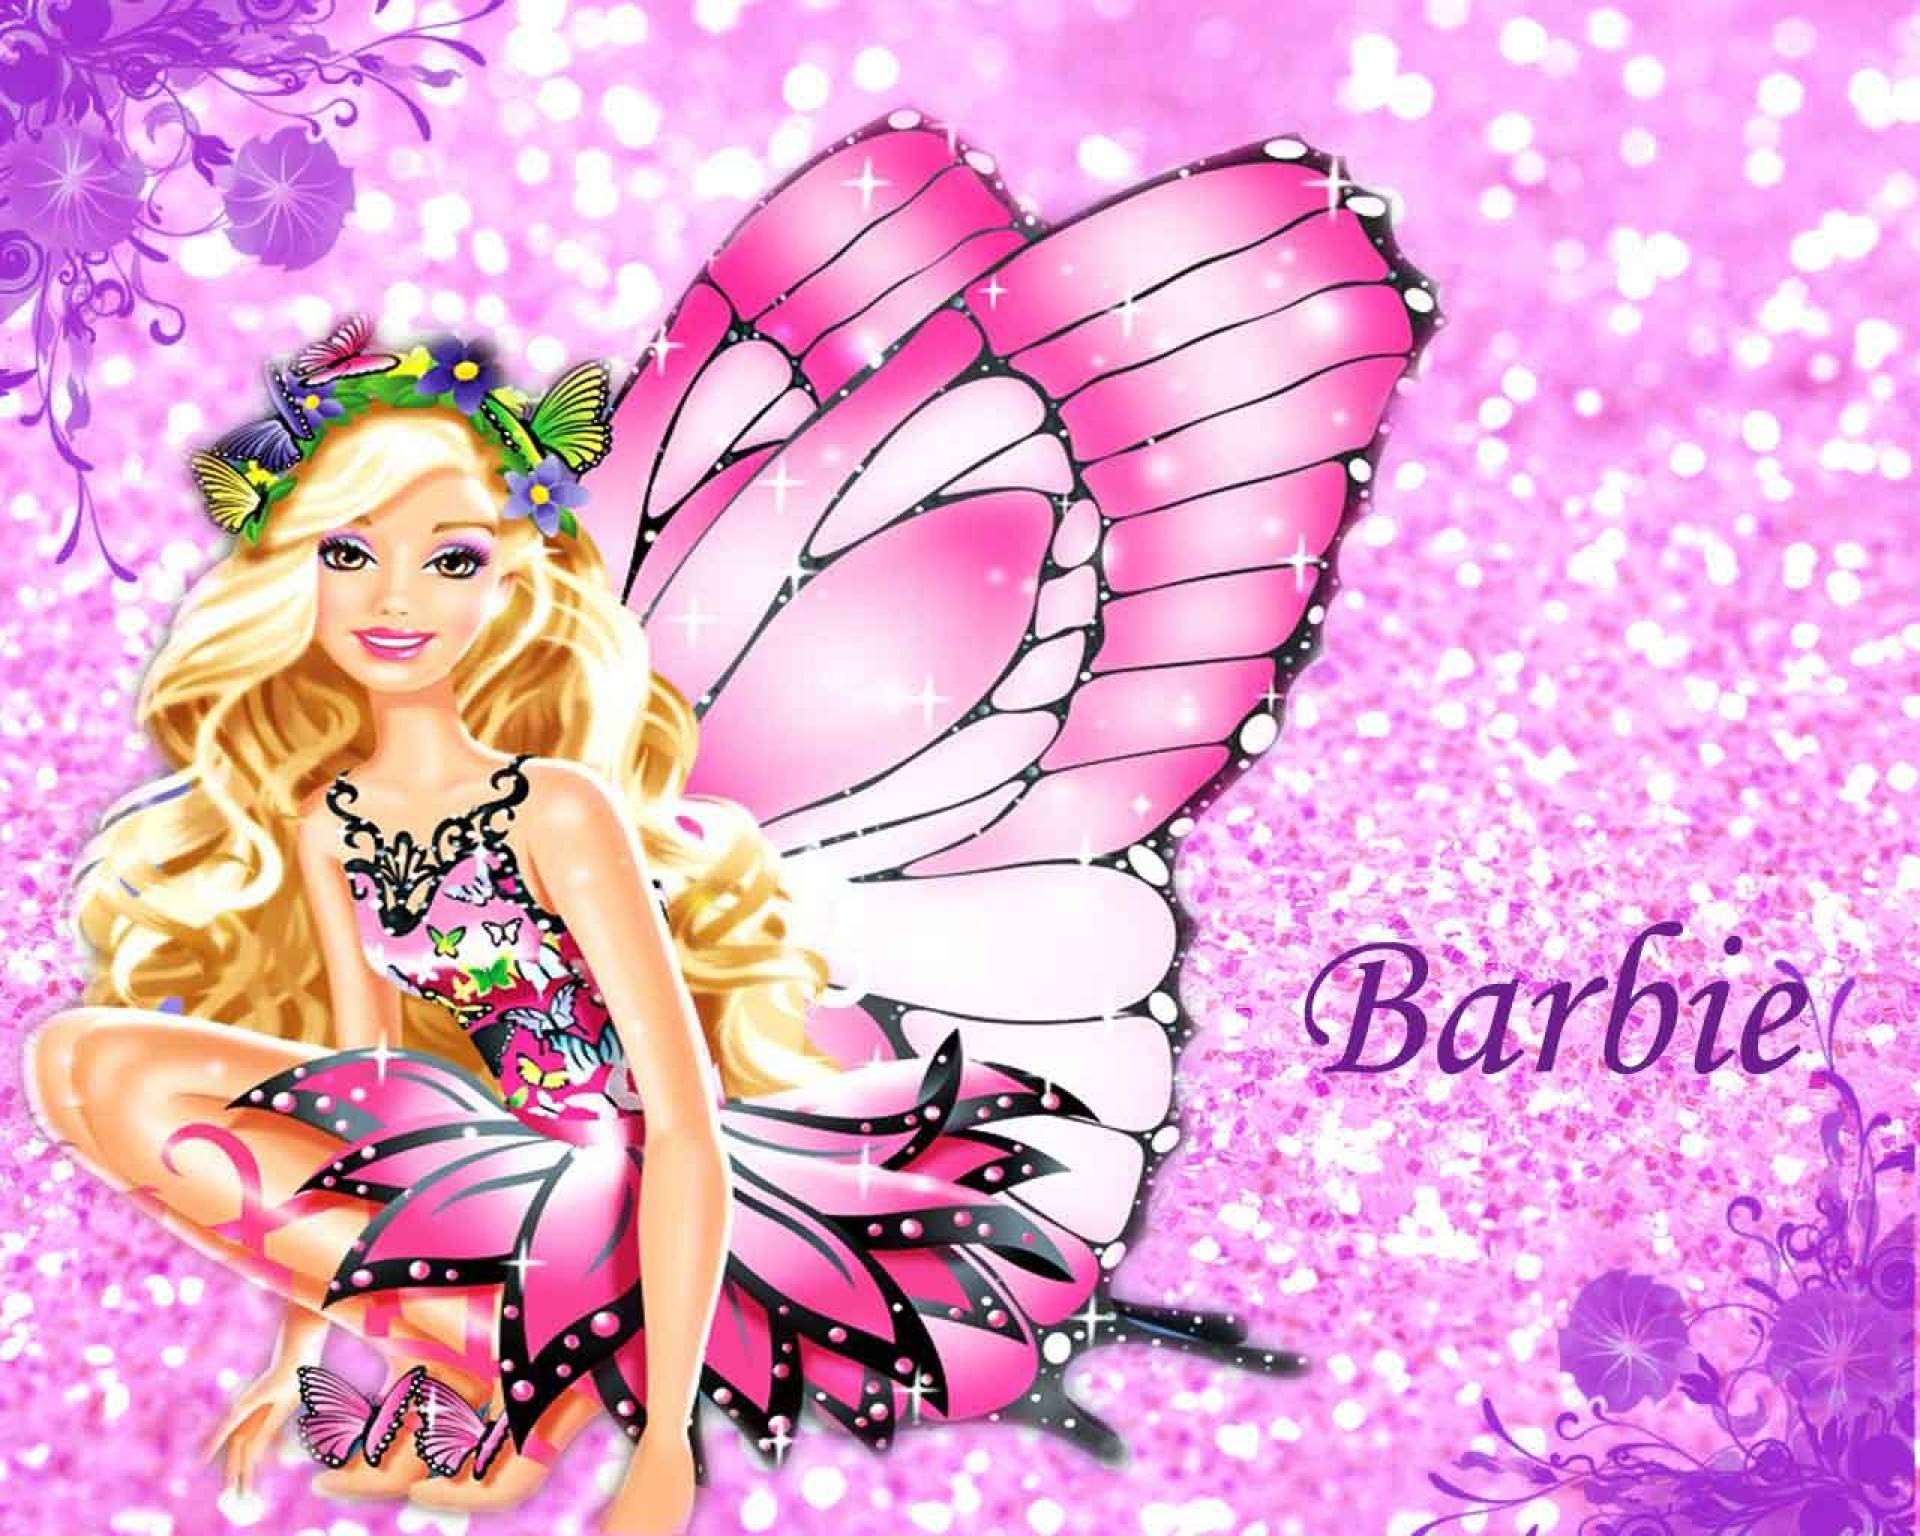 Latest Wallpapers Of Barbie On 2015 - Wallpaper Cave